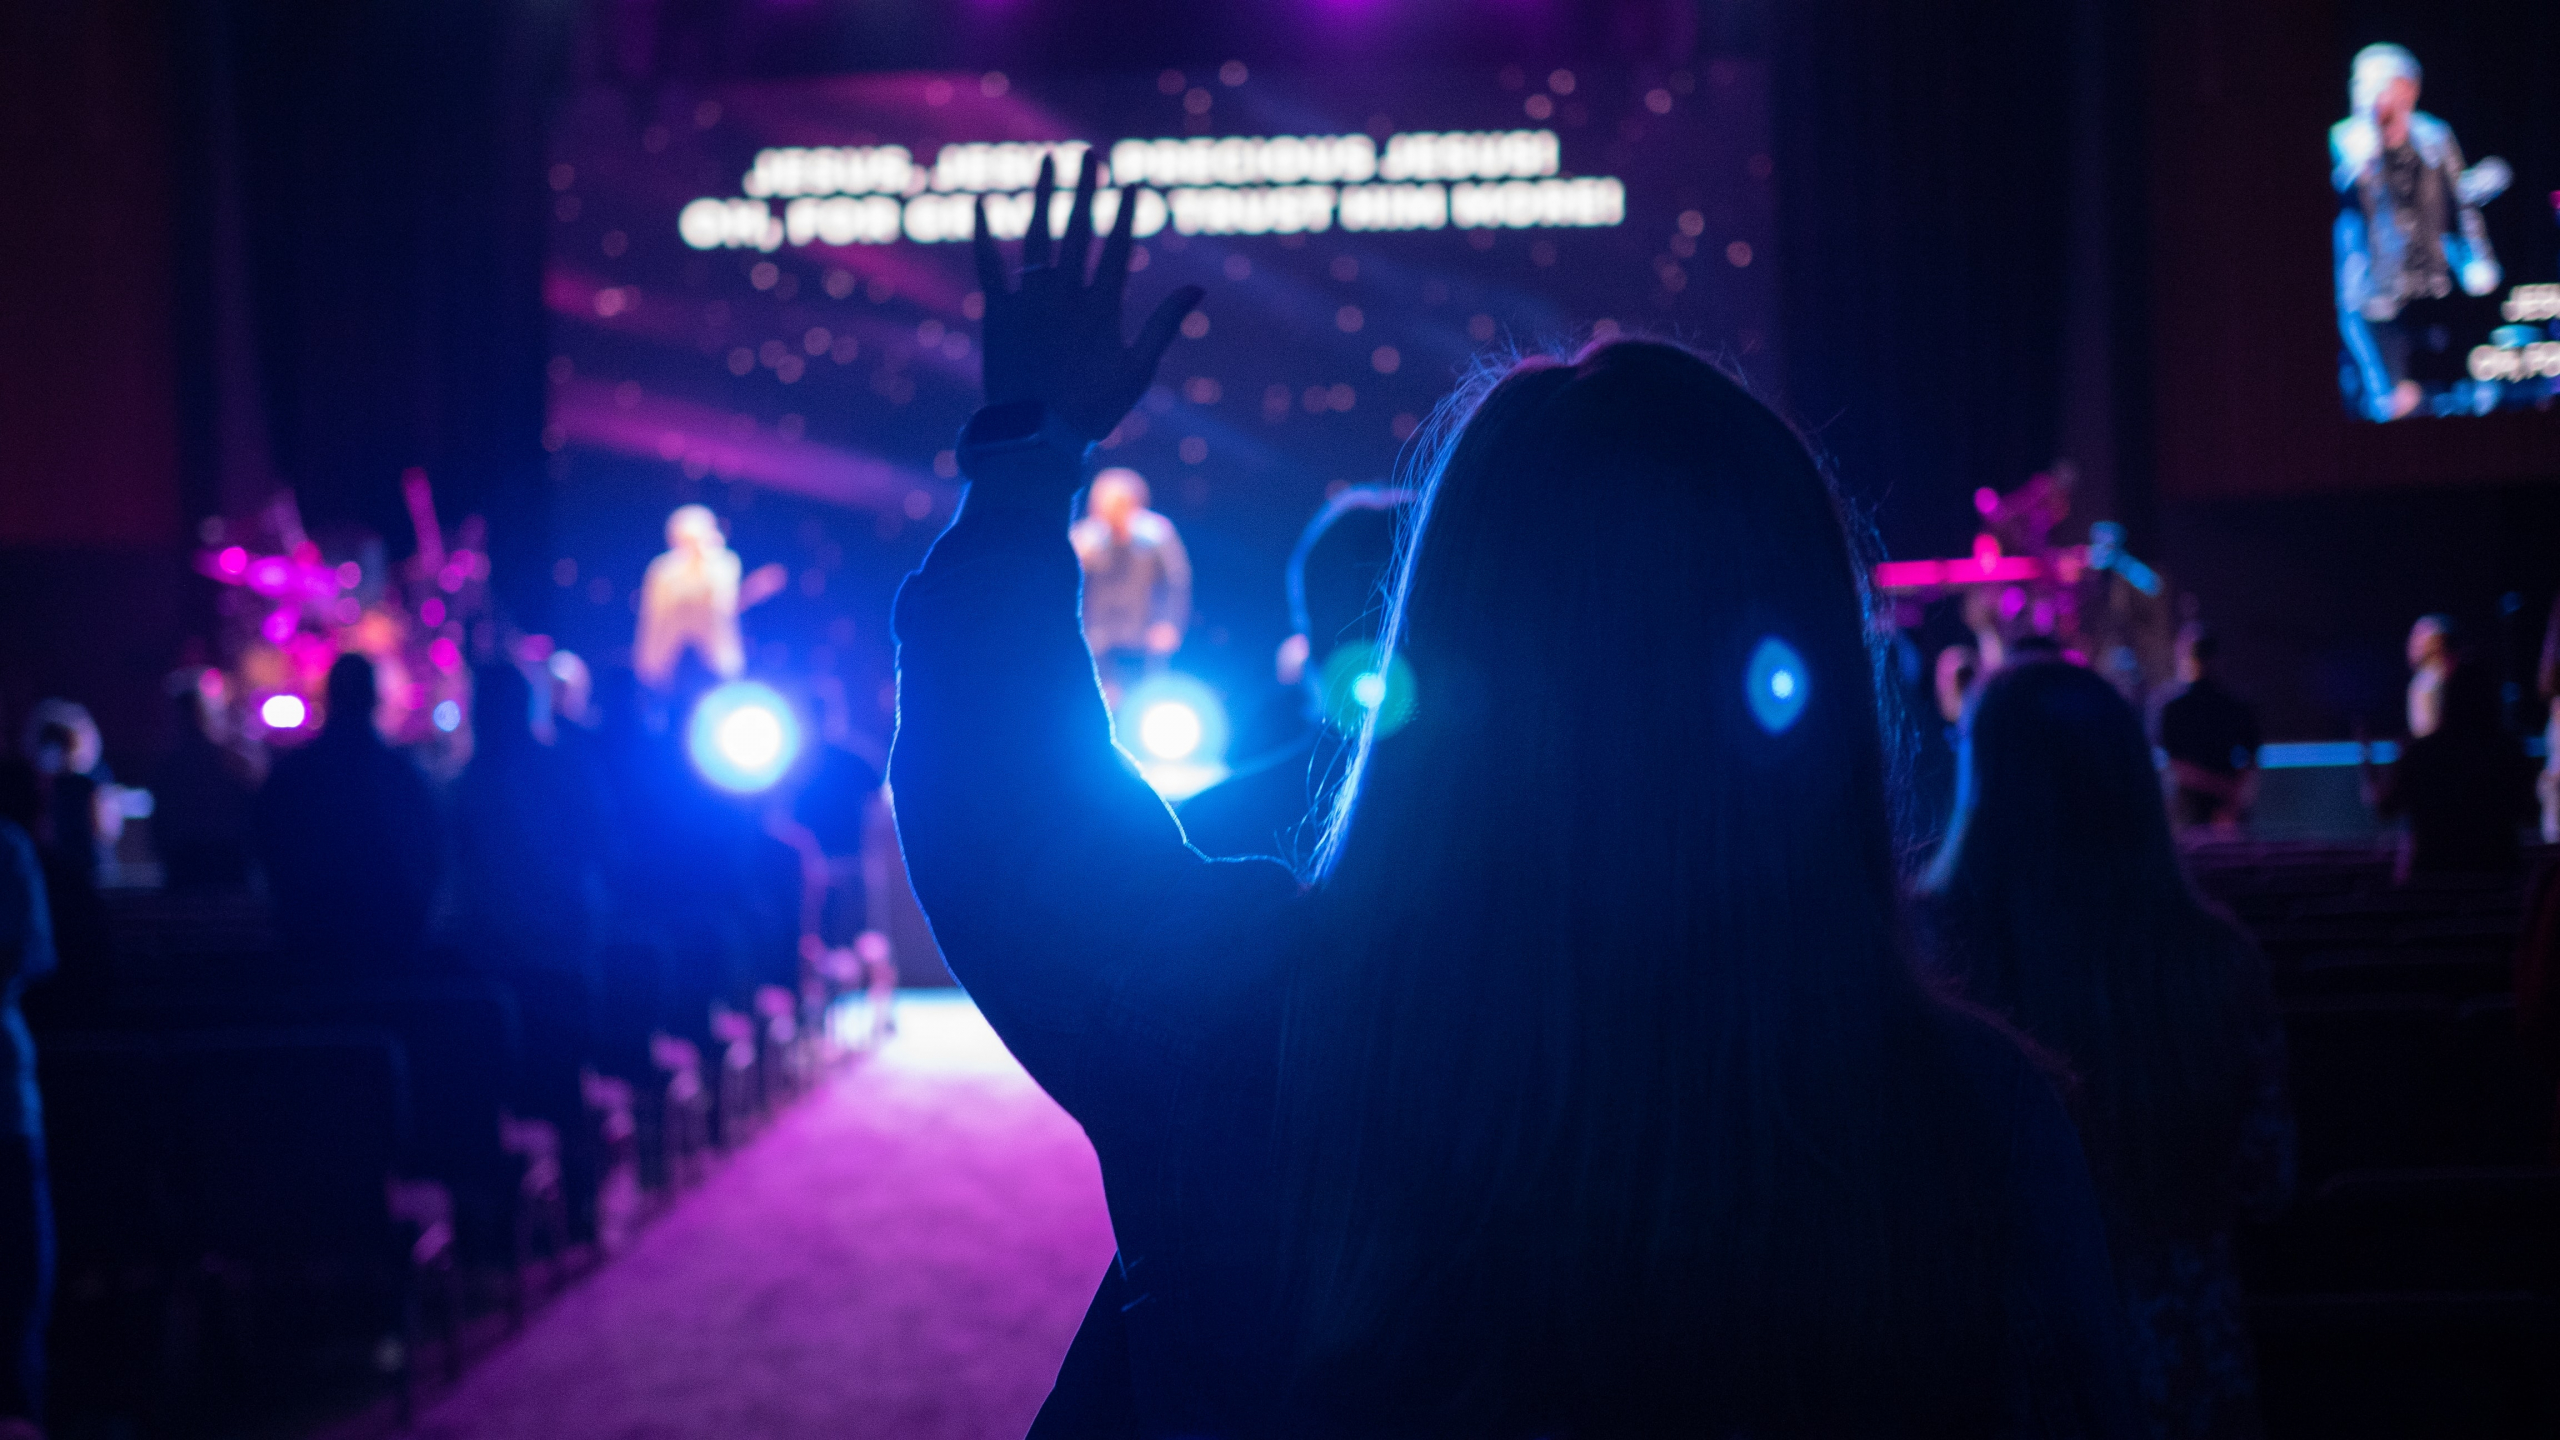 Leading Worship with Compassion | Worshipper with hands raised at a church worship service or other worship event.